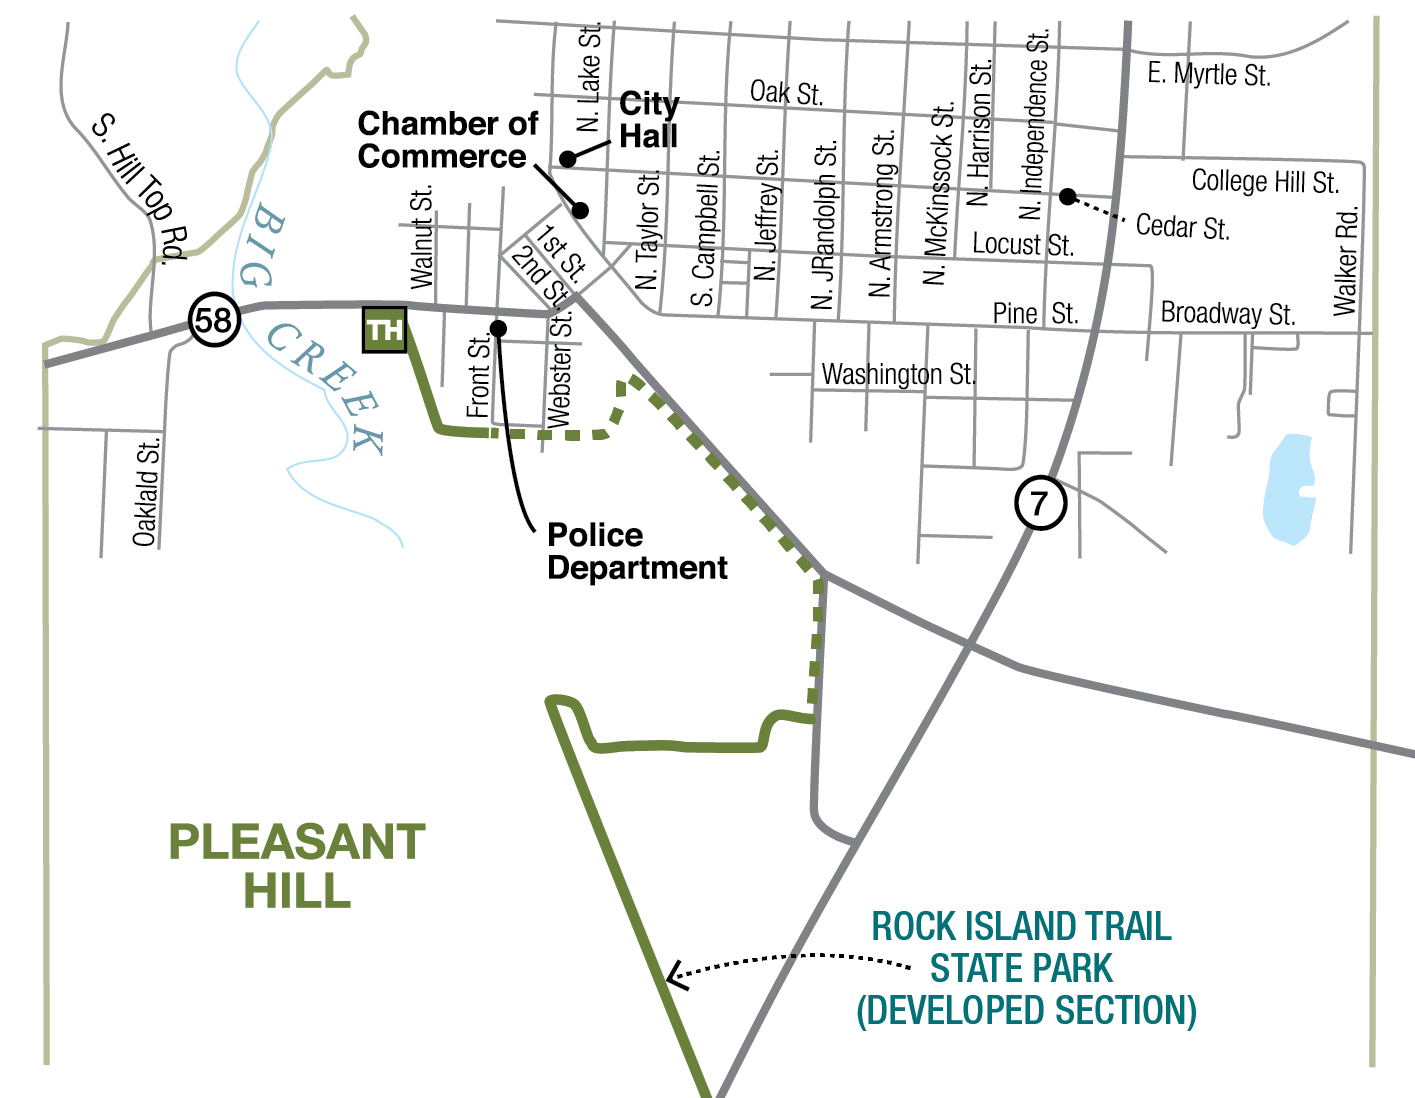 Map of Pleasant Hill trailhead, Rock Island Trail, and surrounding streets and features